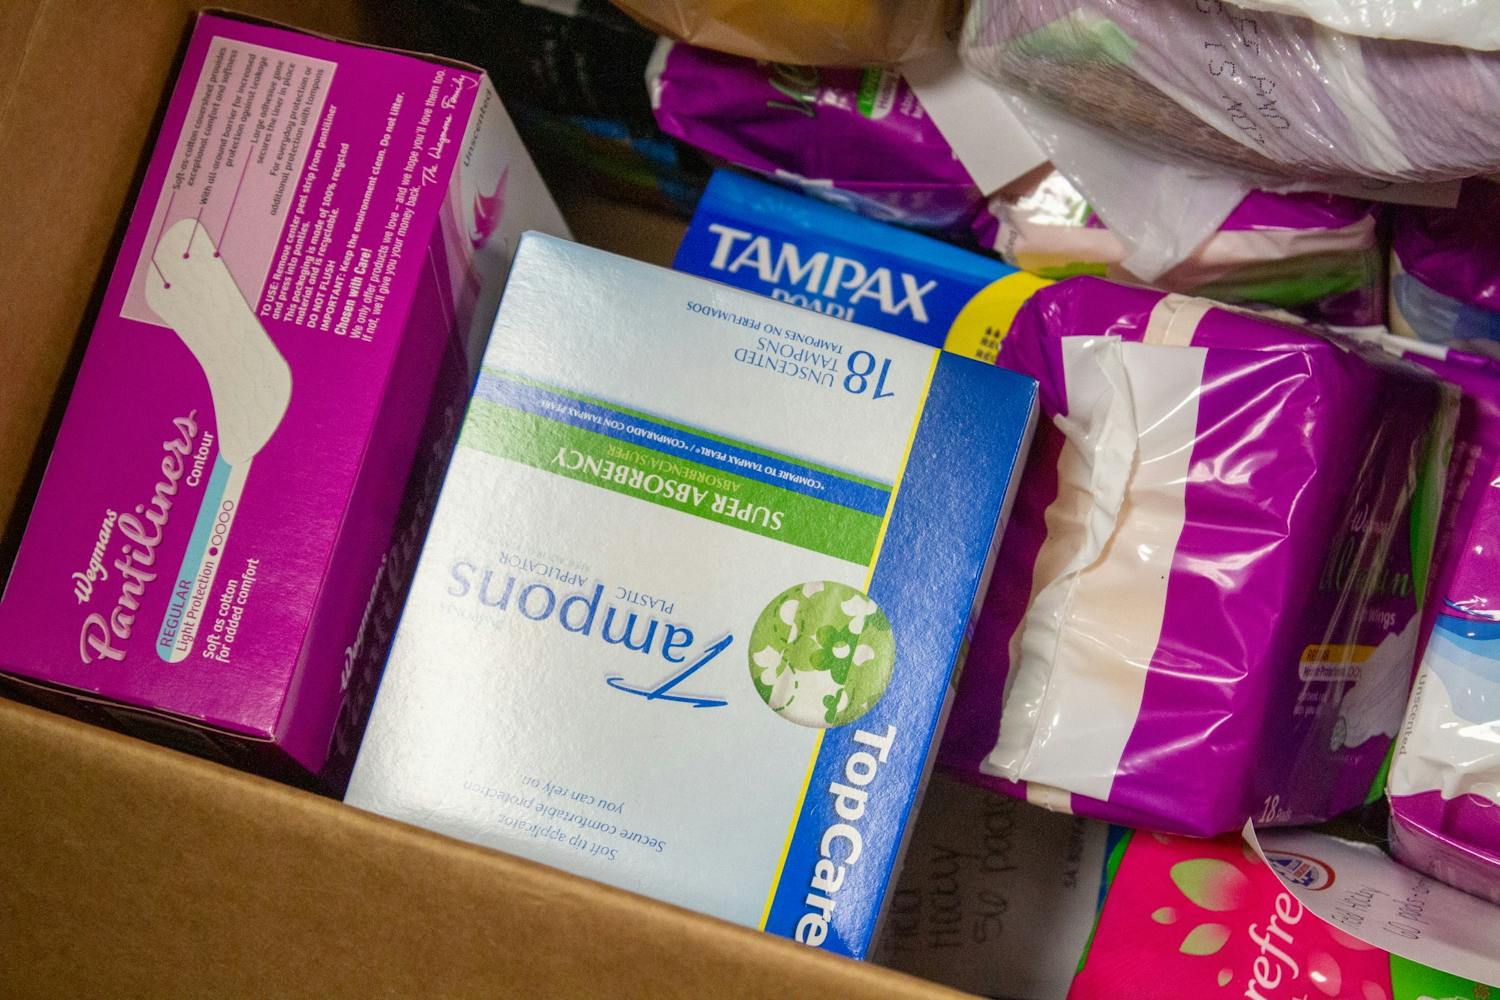 Menstrual products donated to the Student Association’s drive, which will last until Nov. 8.